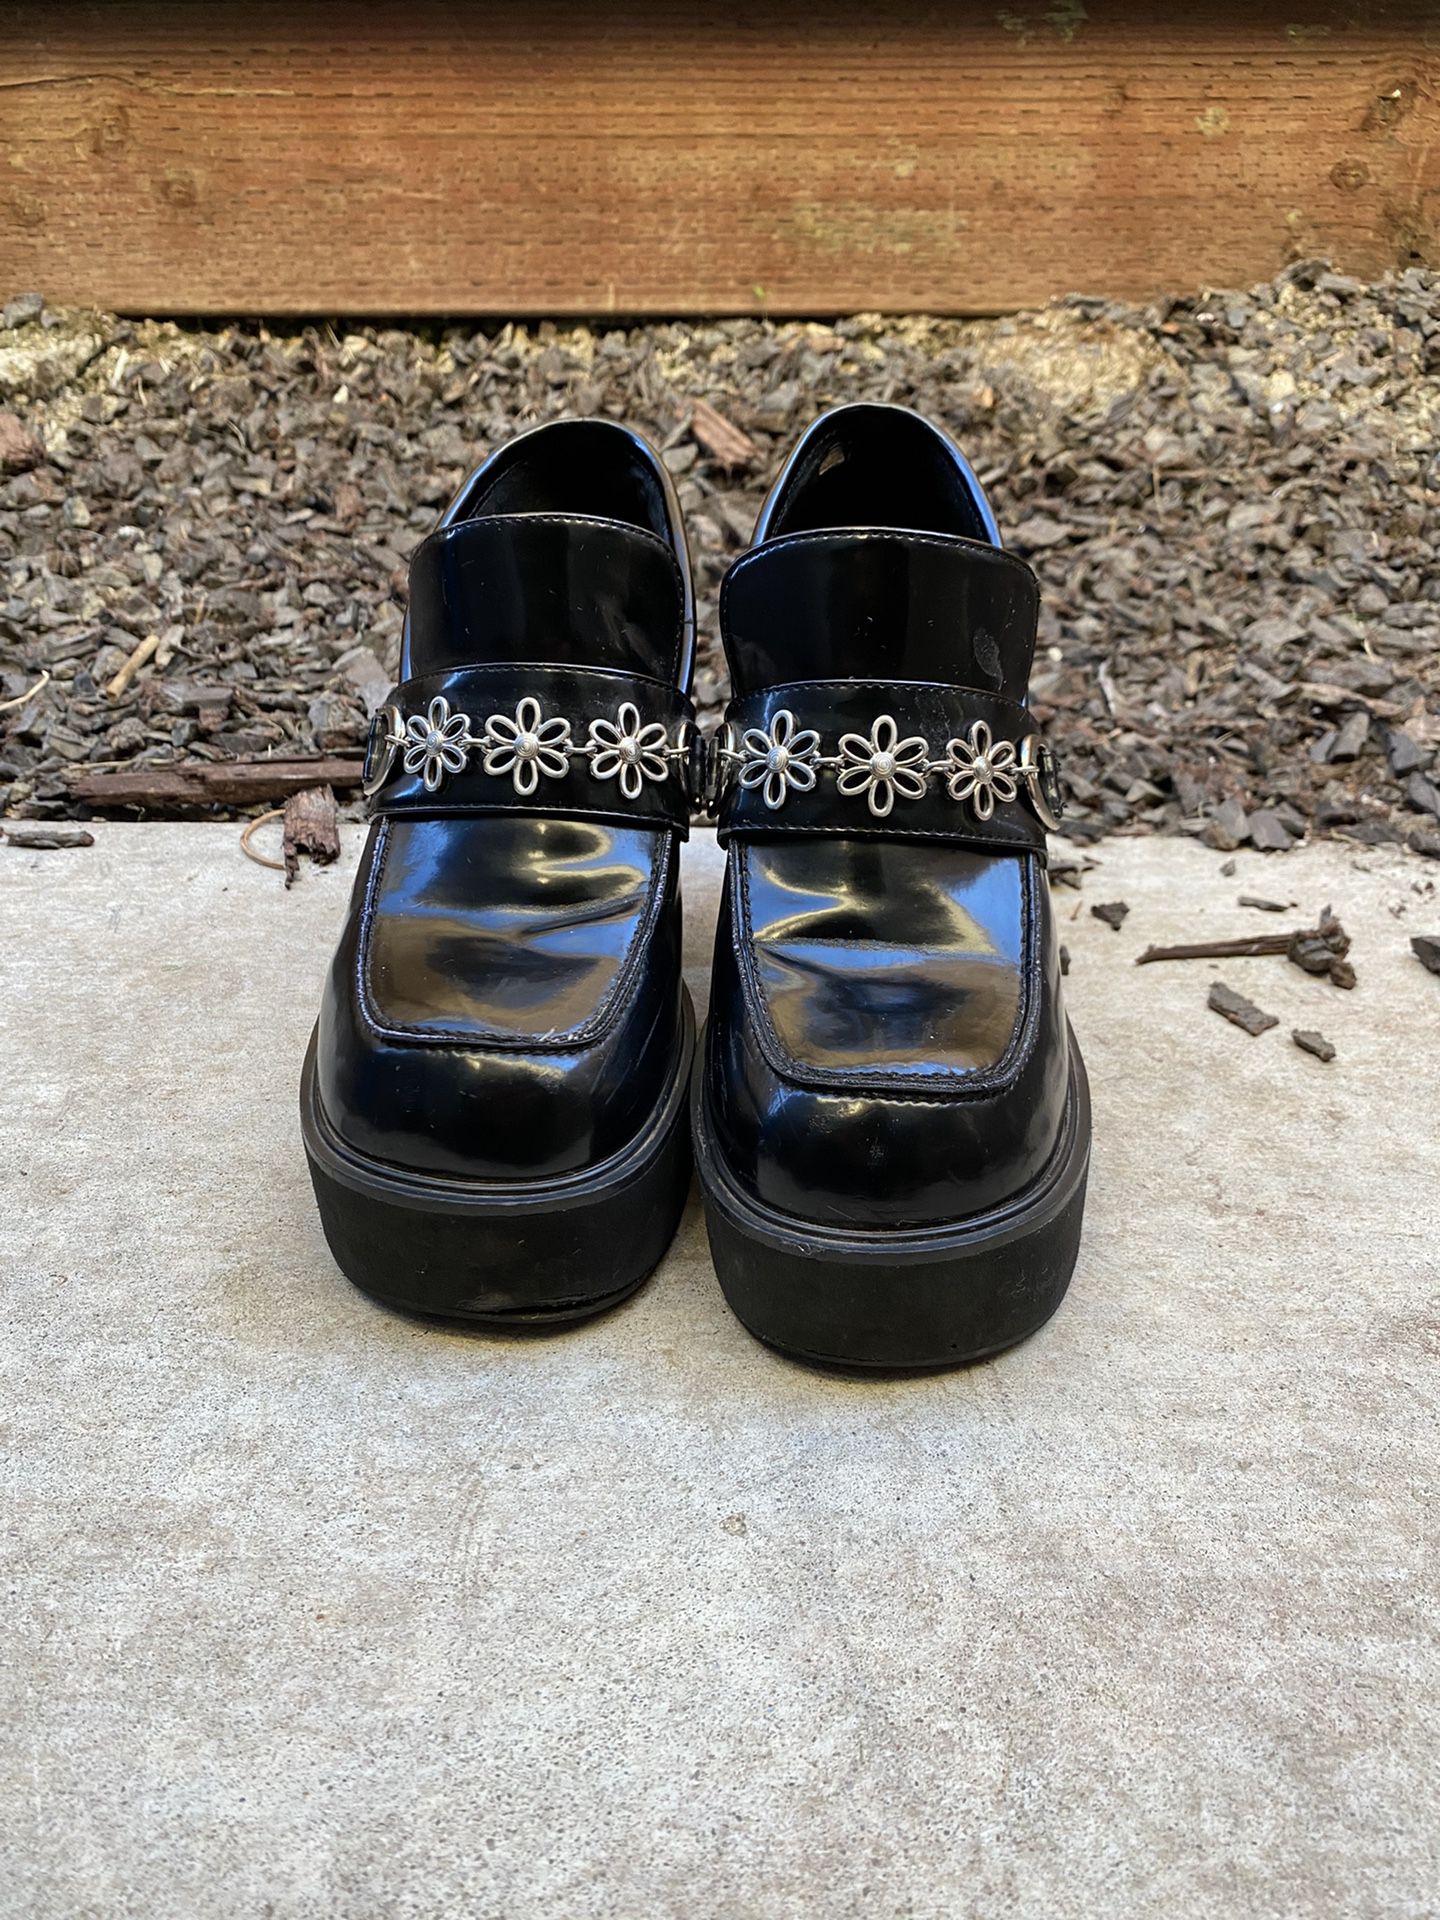 Women's Black Patent Leather Delia's Pumps Platform Heels Size 8M Man Made Sole, Made in China, Flower Silver Chain Embellishment, Pre-Owned